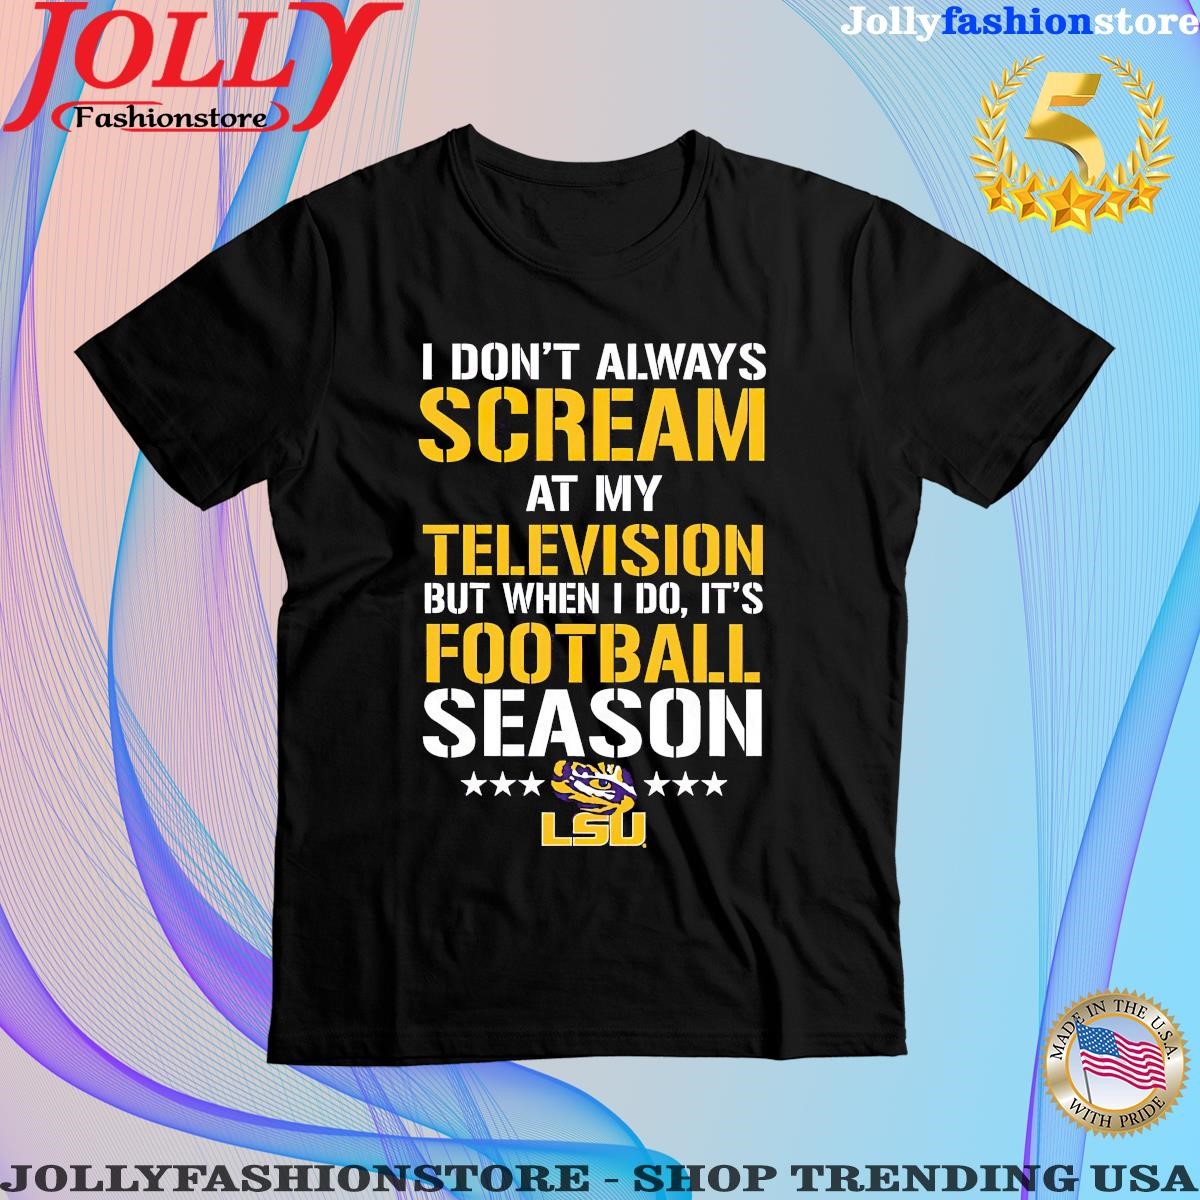 I don't always scream at my television but when I do it's Football season lsu tigers Shirt